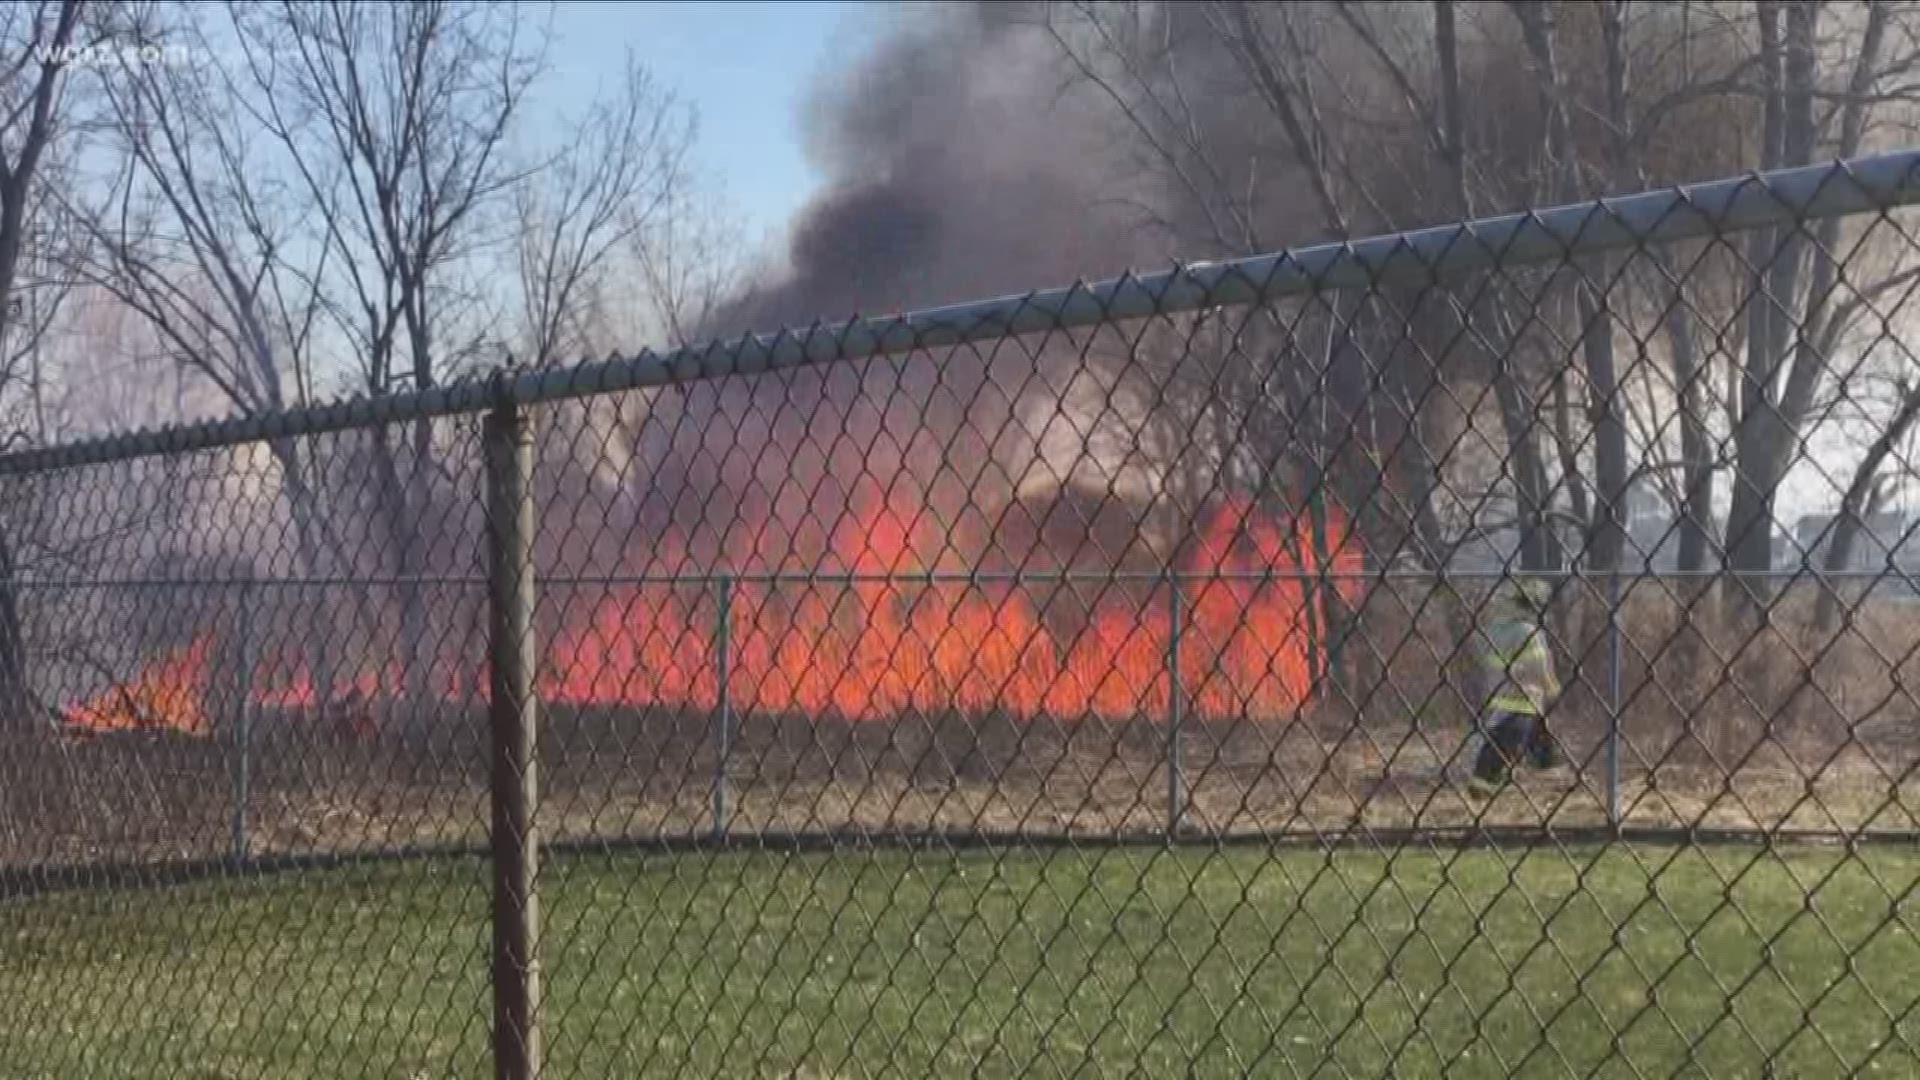 Crews were called to a large brush fire near the airport Monday.